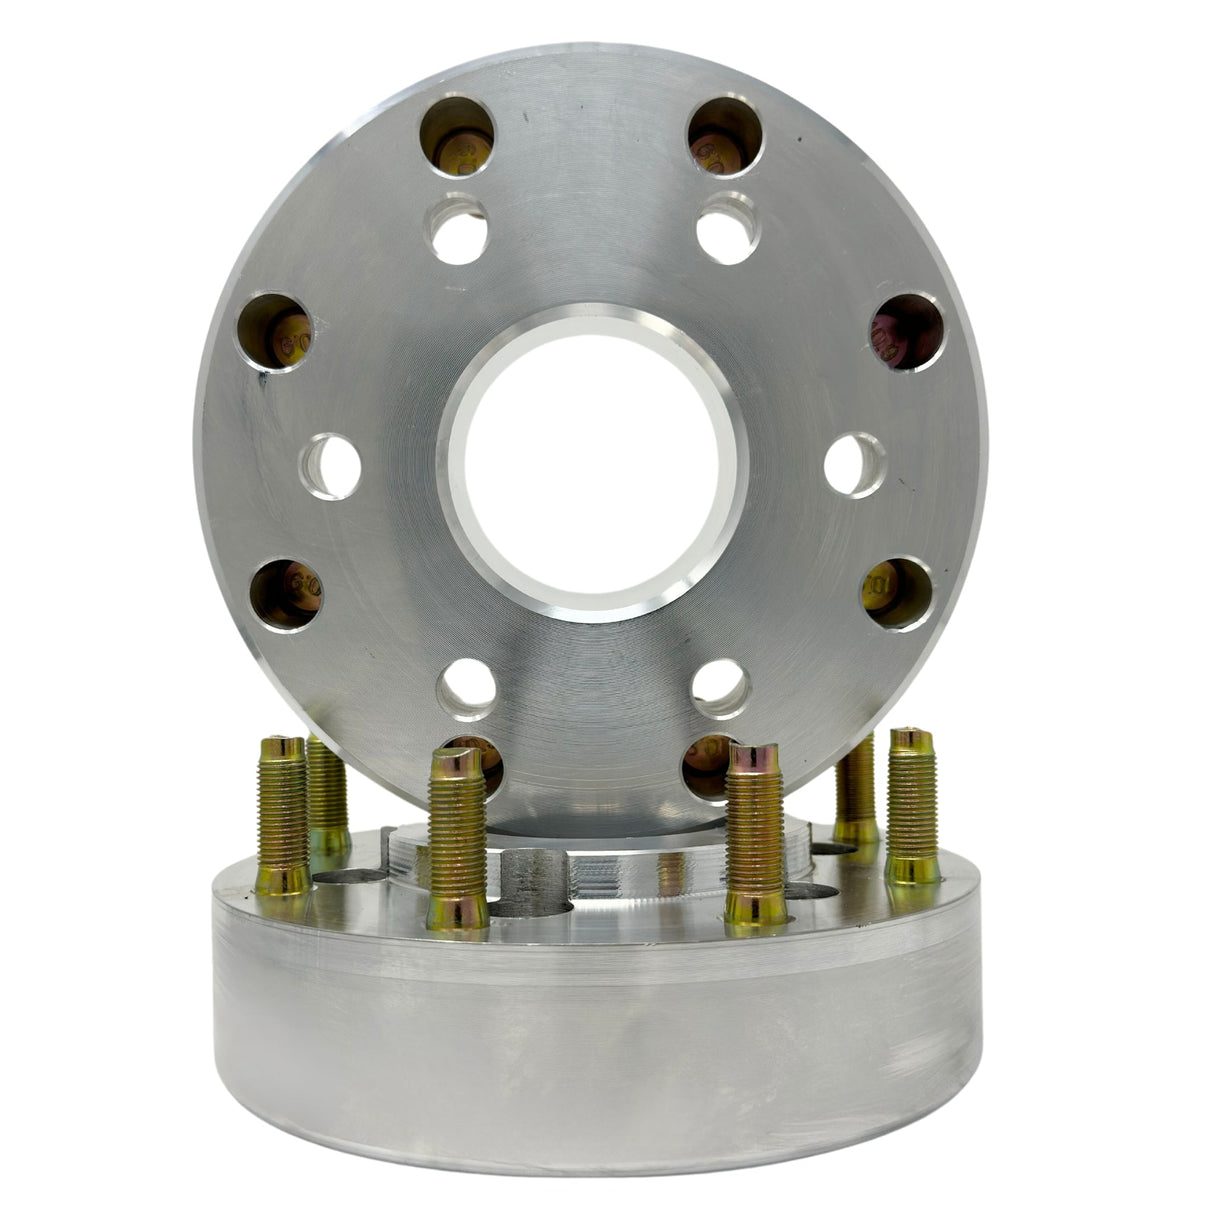 Ford 6x135 To 8x200 F-350 Dually Hub Centric Wheel Adapters For F-150, Bronco Raptor, | 87.1mm To 142mm Centerbore | 14x1.5 Studs 1" Inch - 2" Inch Thicknesses Also Fits Navigator, Expedition + More MADE IN THE USA